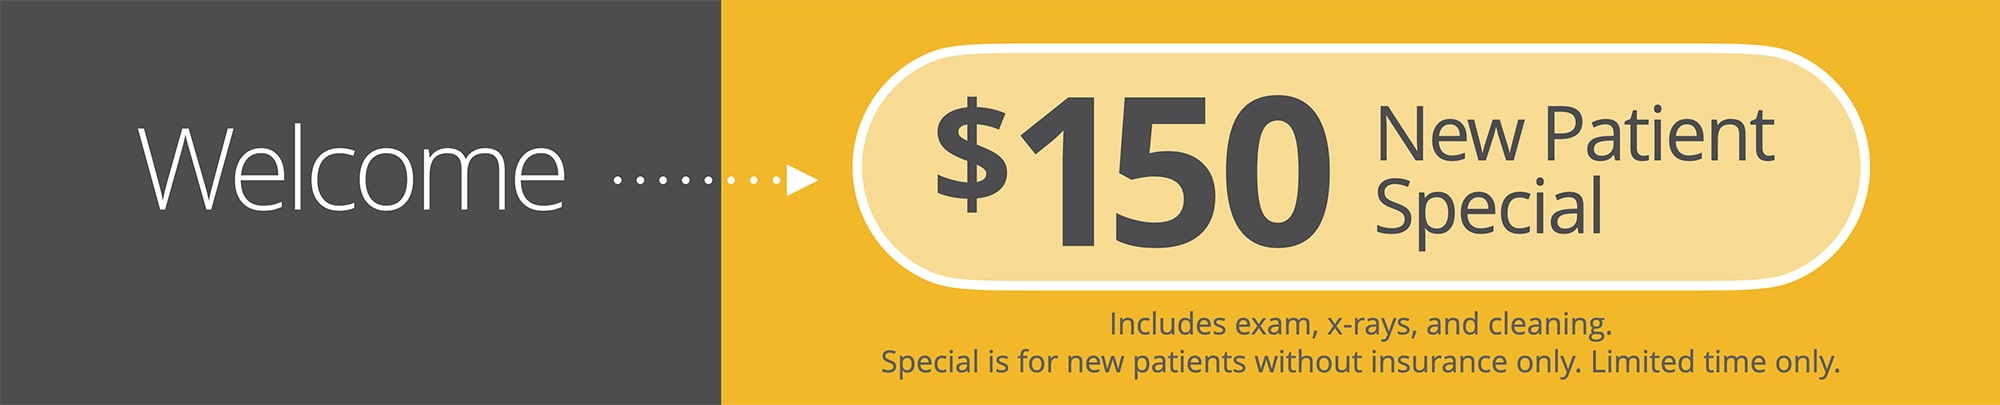 $150 new patient special includes exam, x-rays, and cleaning